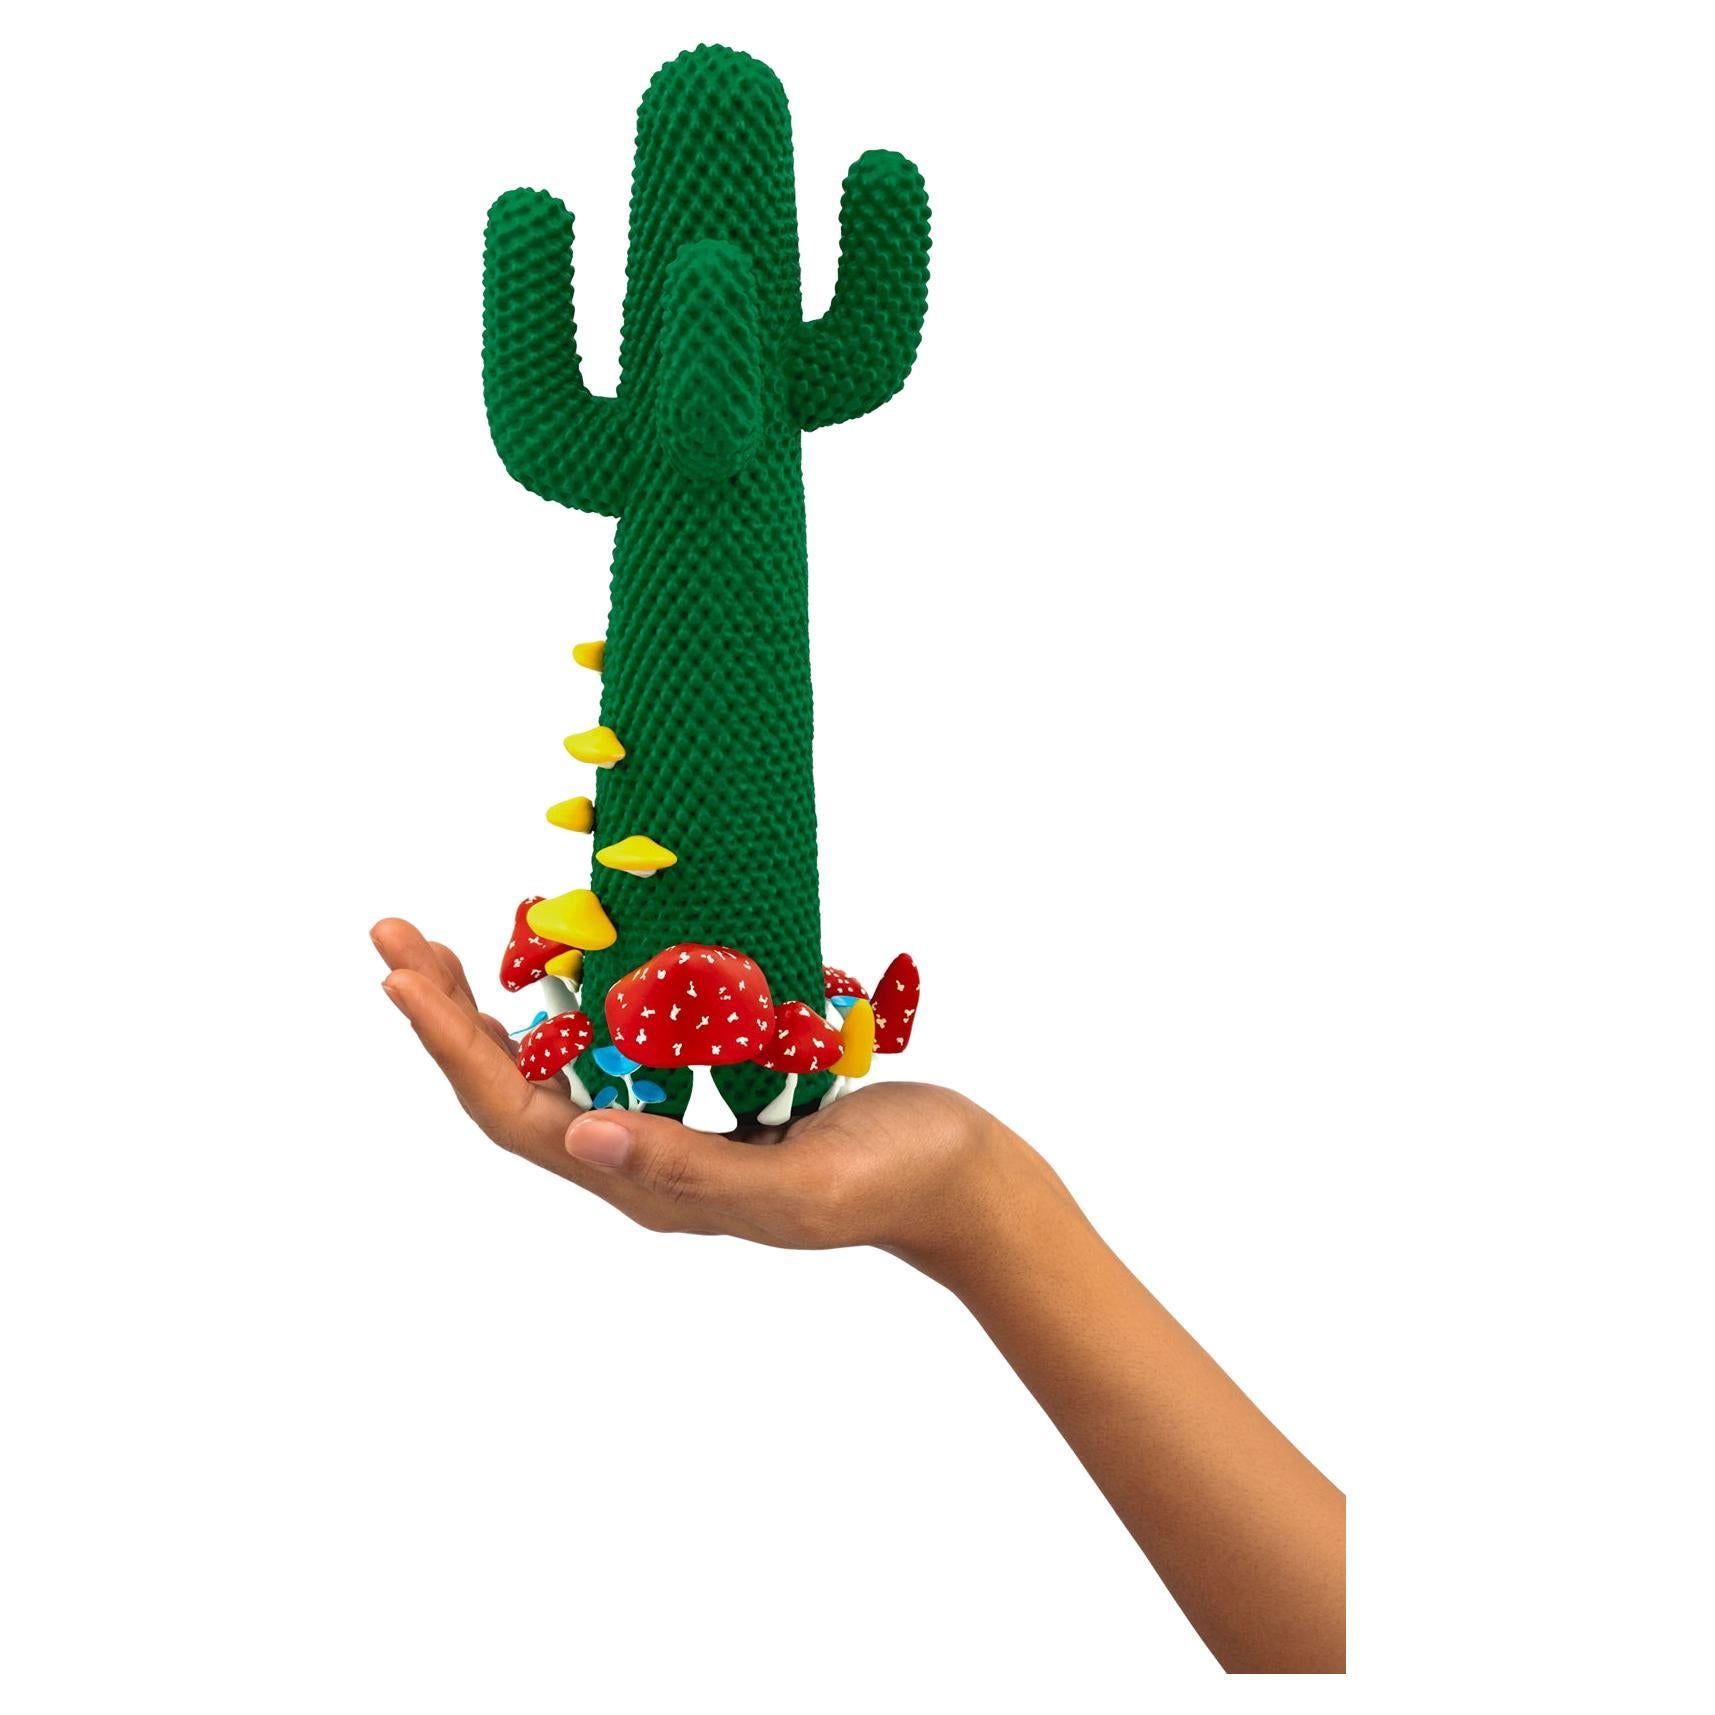 LIMITED EDITION #19/99

Gufram presents the miniaturised version of the Shroom CACTUS® created in collaboration with A$AP Rocky and the artist’s new design studio HOMMEMADE Exactly as the real-Size Shroom CACTUS®, the new Guframini piece features